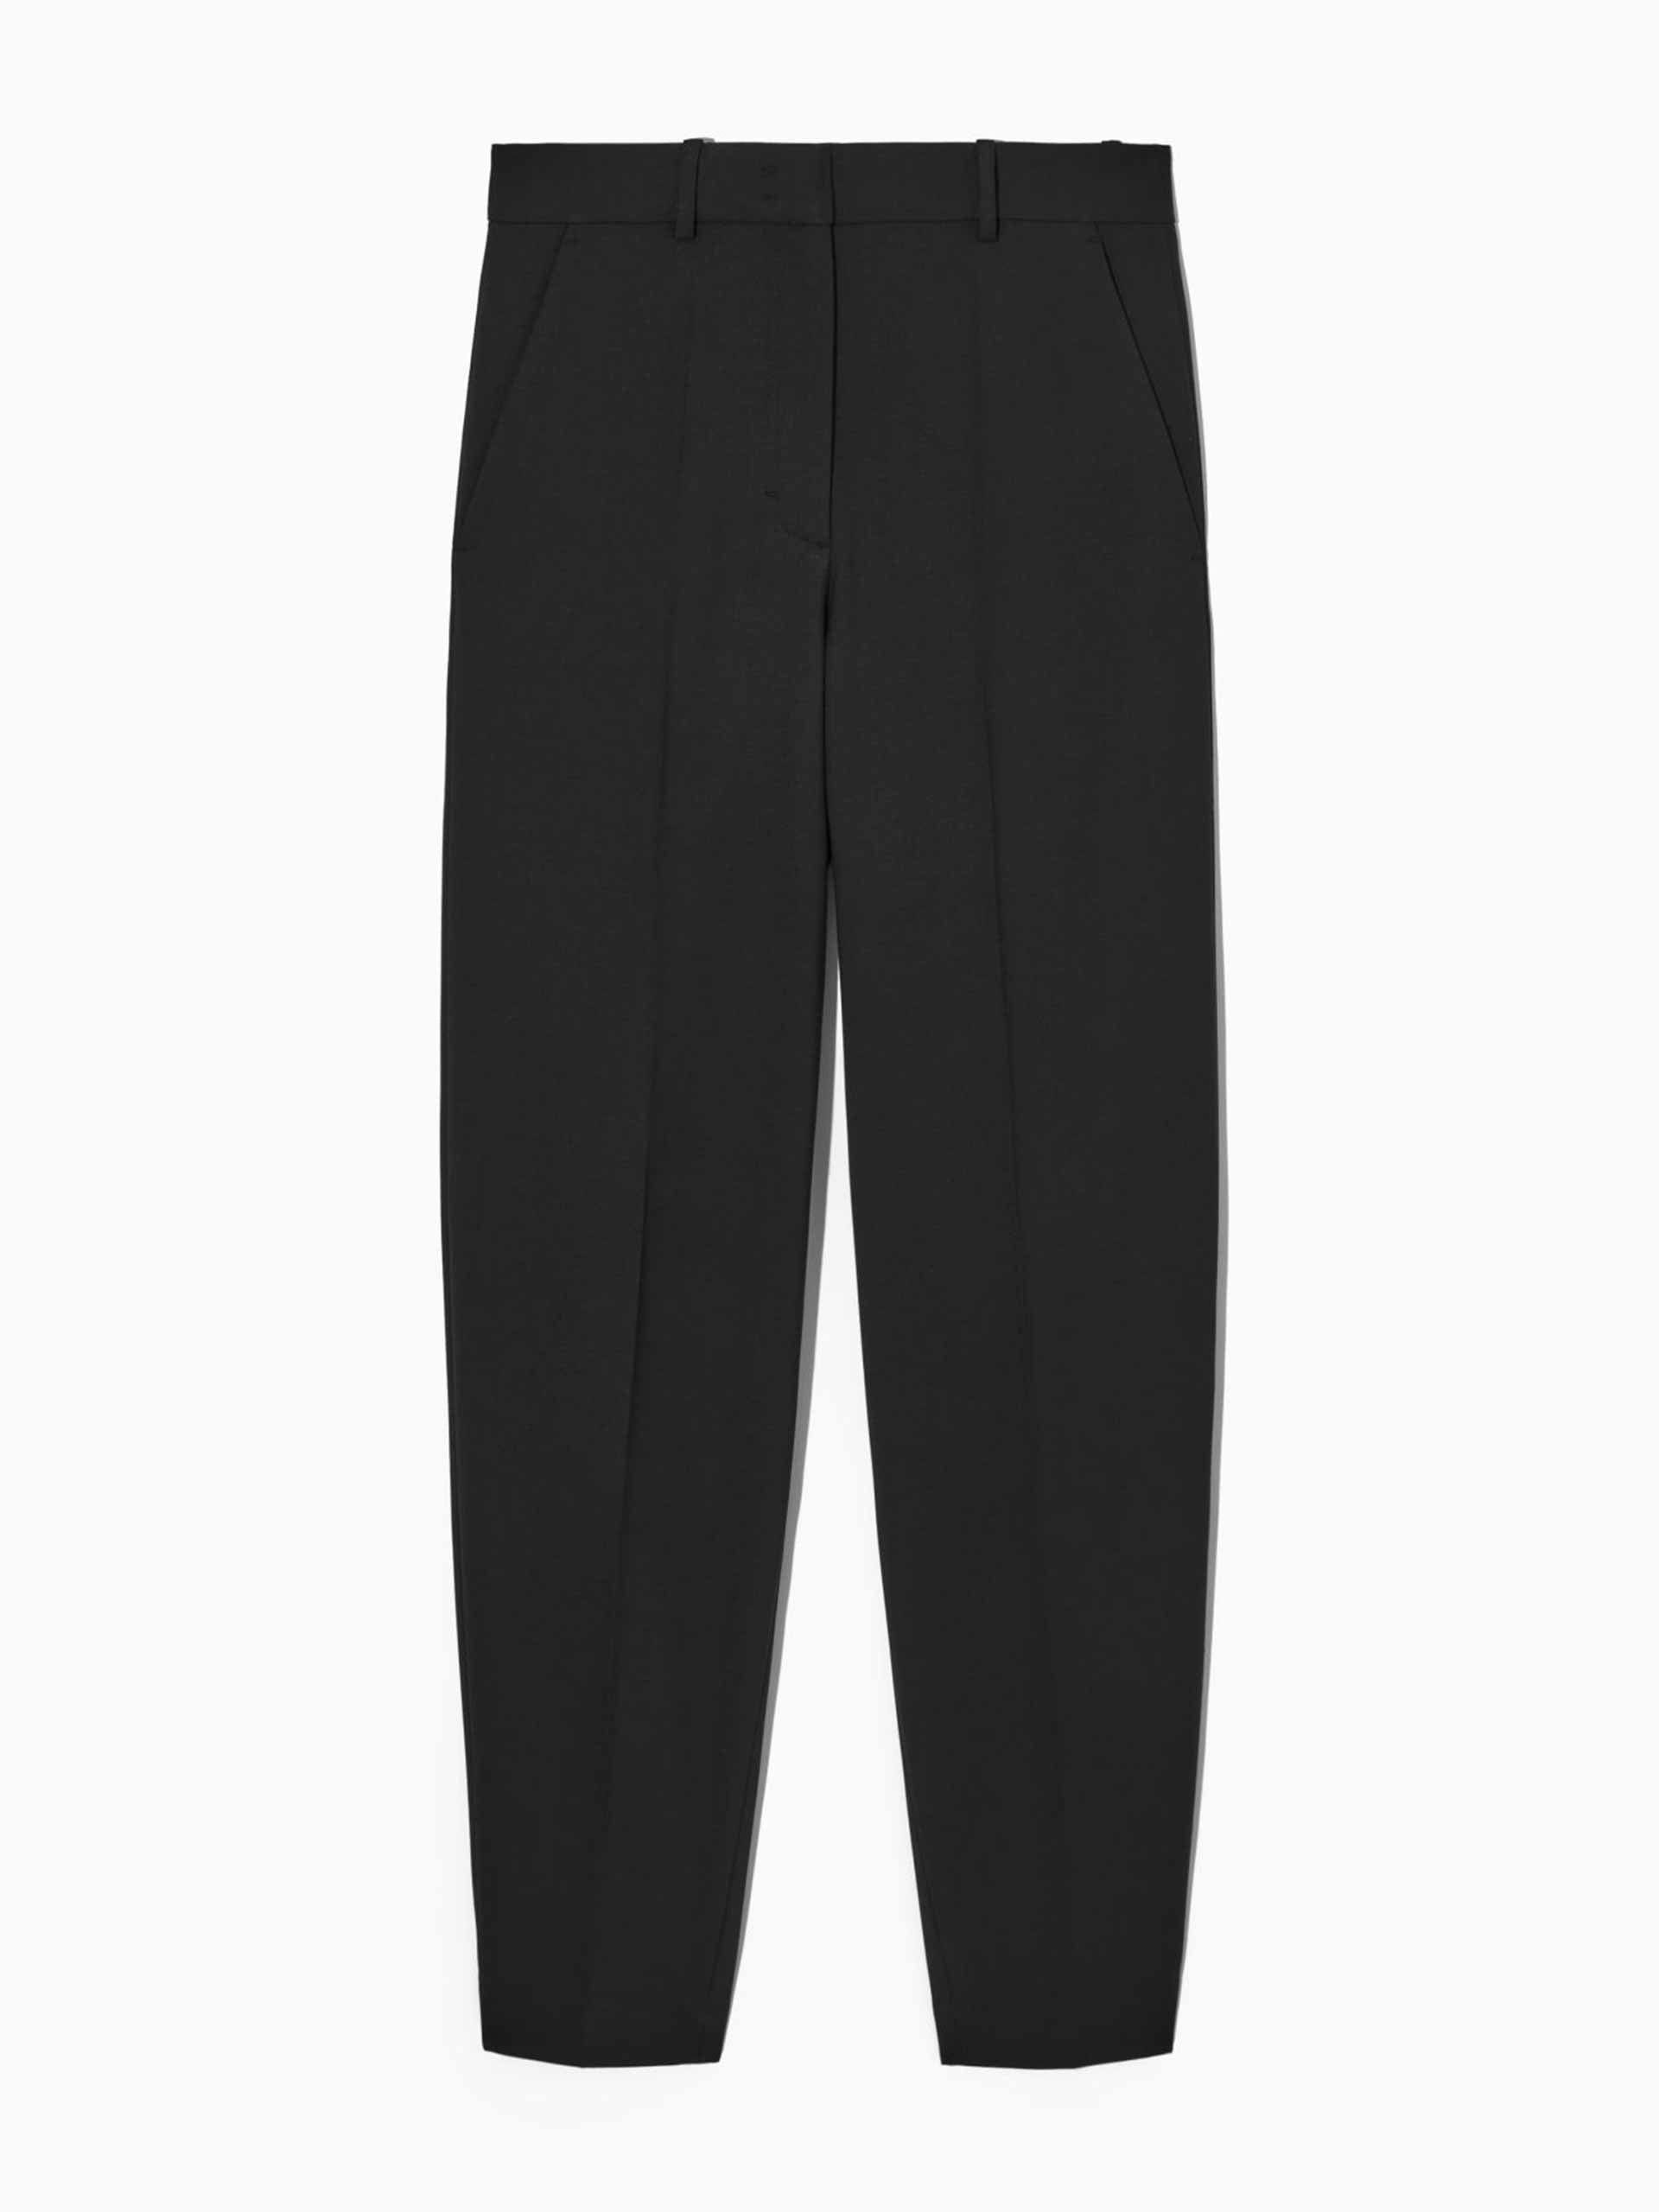 Regular fit tapered wool-blend trousers